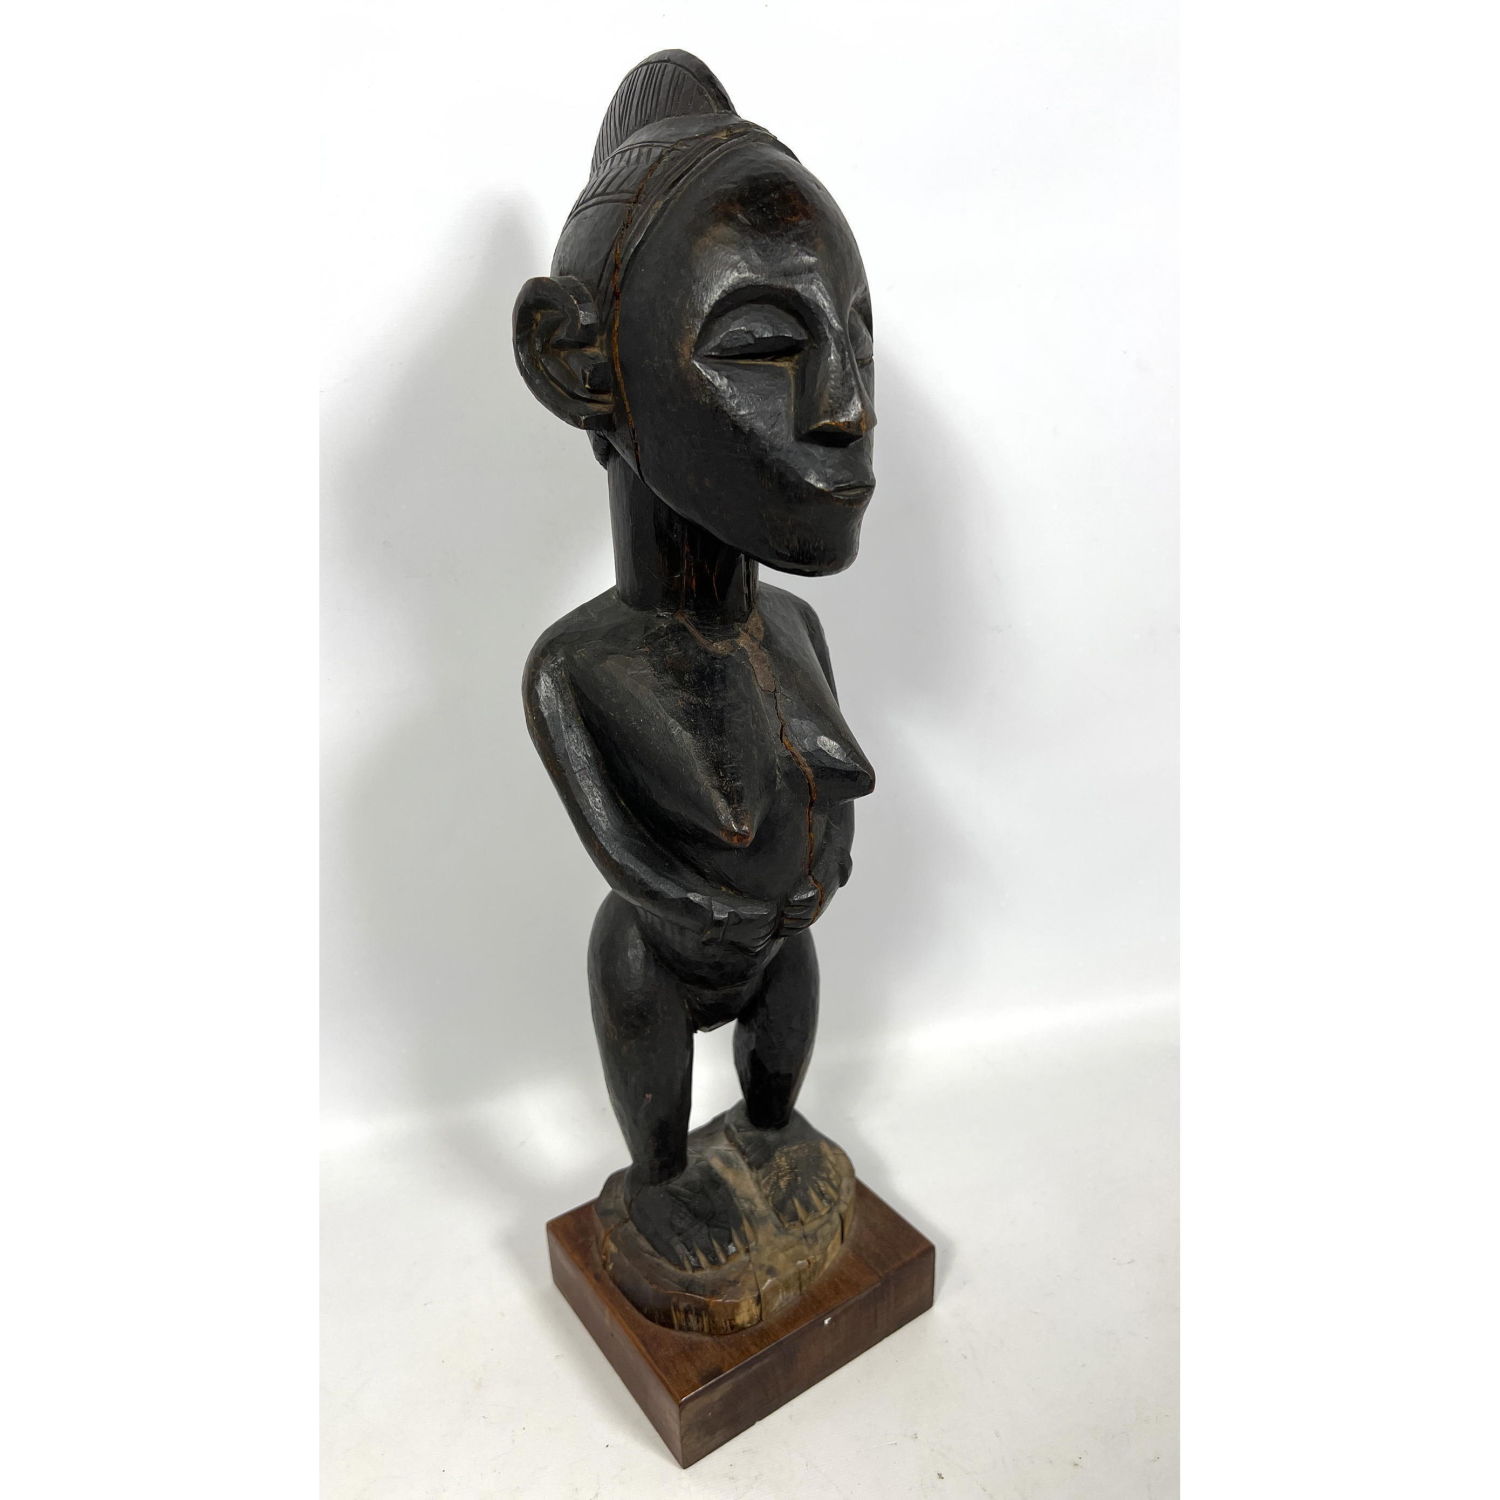 Carved African Wood sculpture.